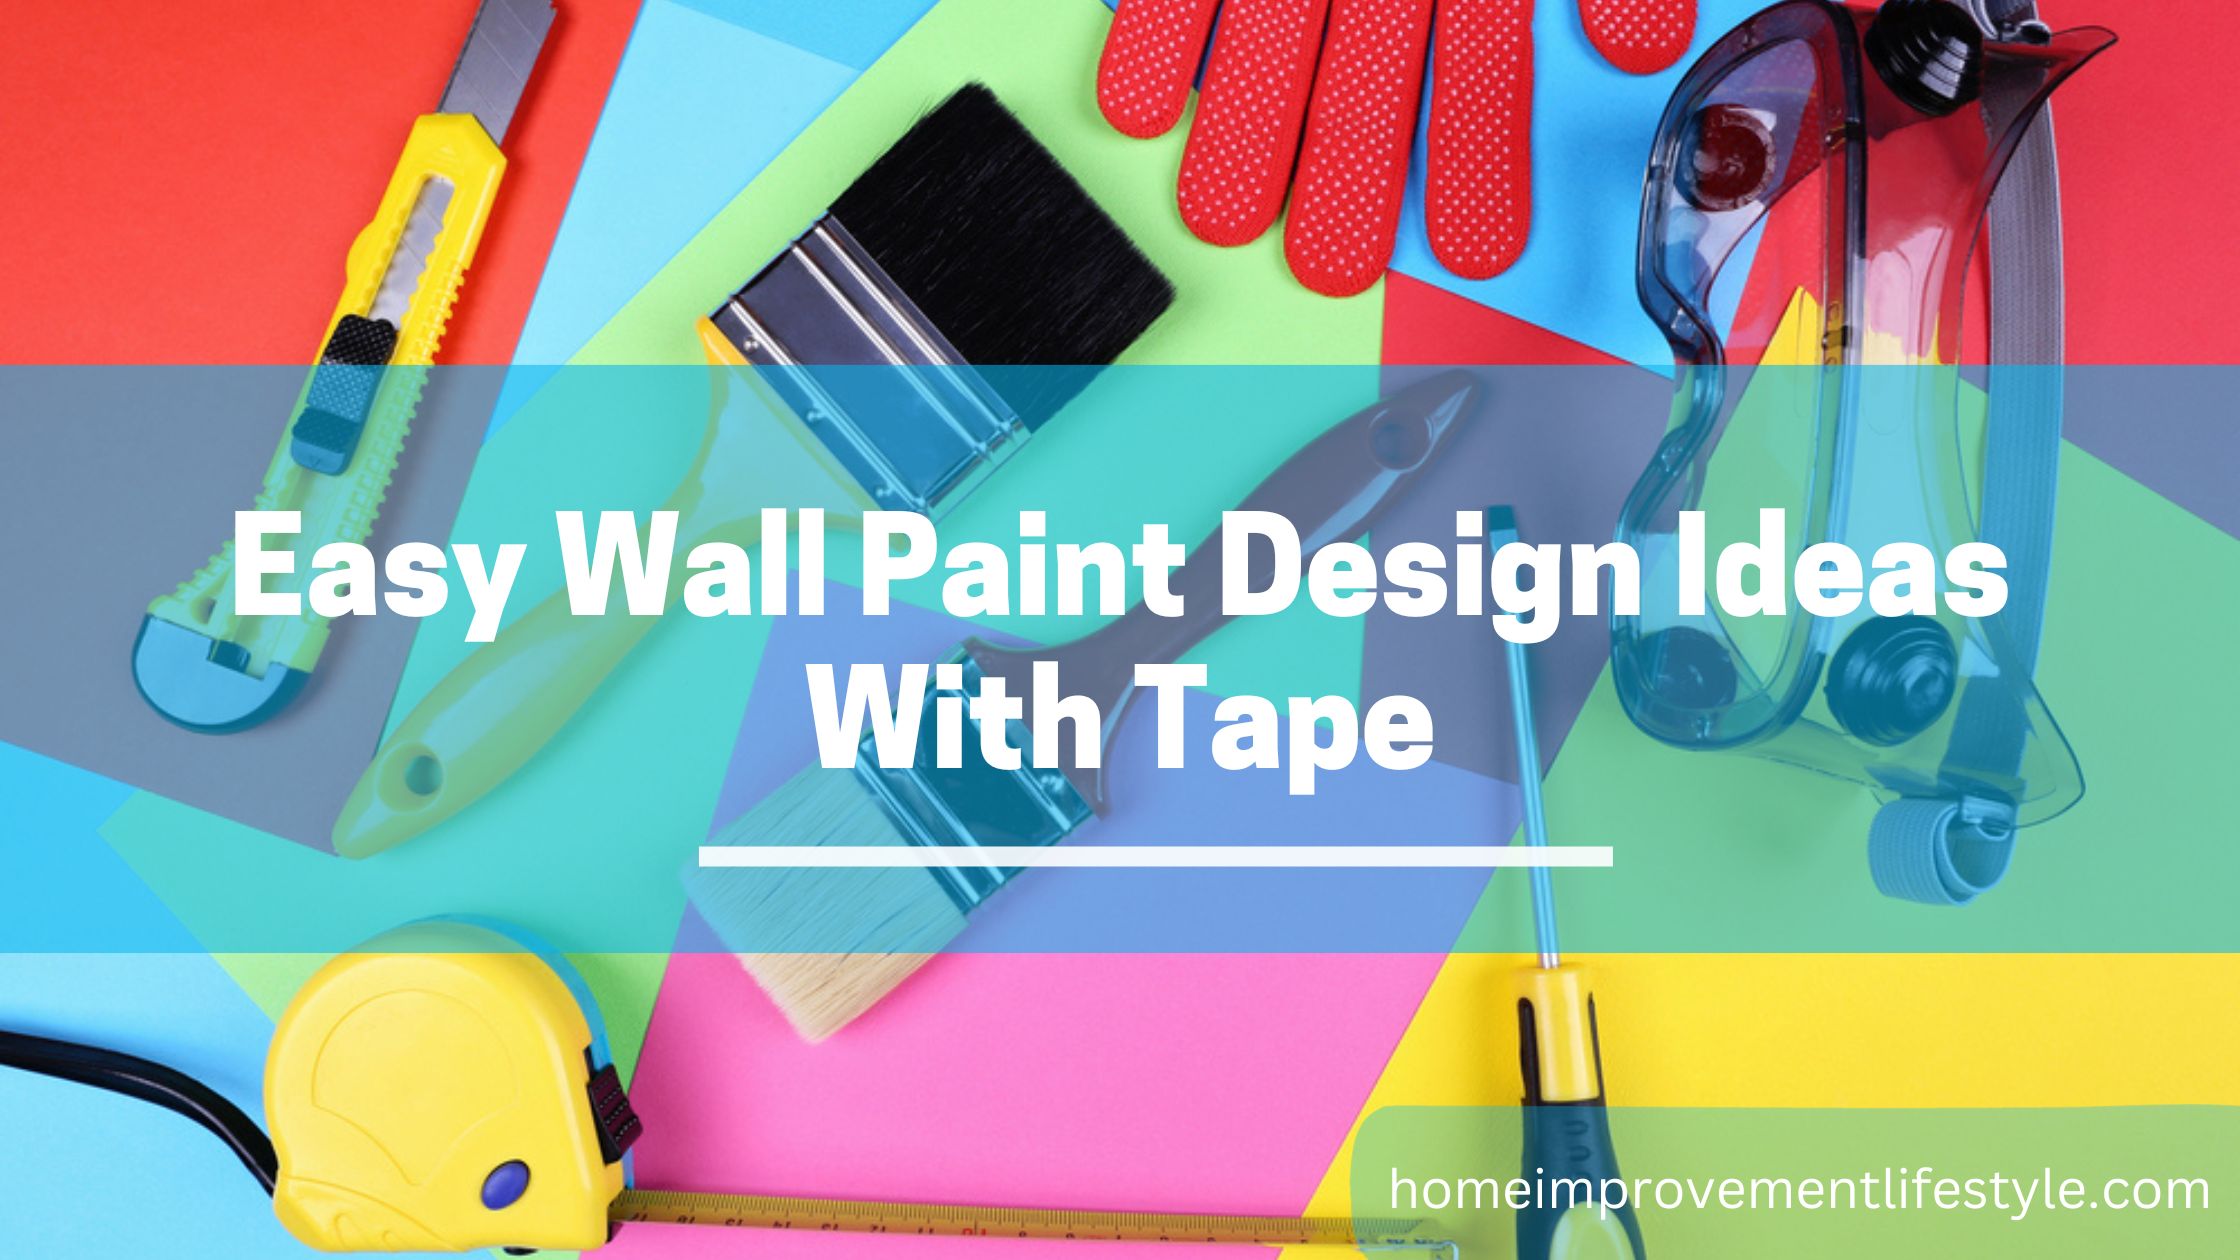 Easy Wall Paint Design Ideas With Tape